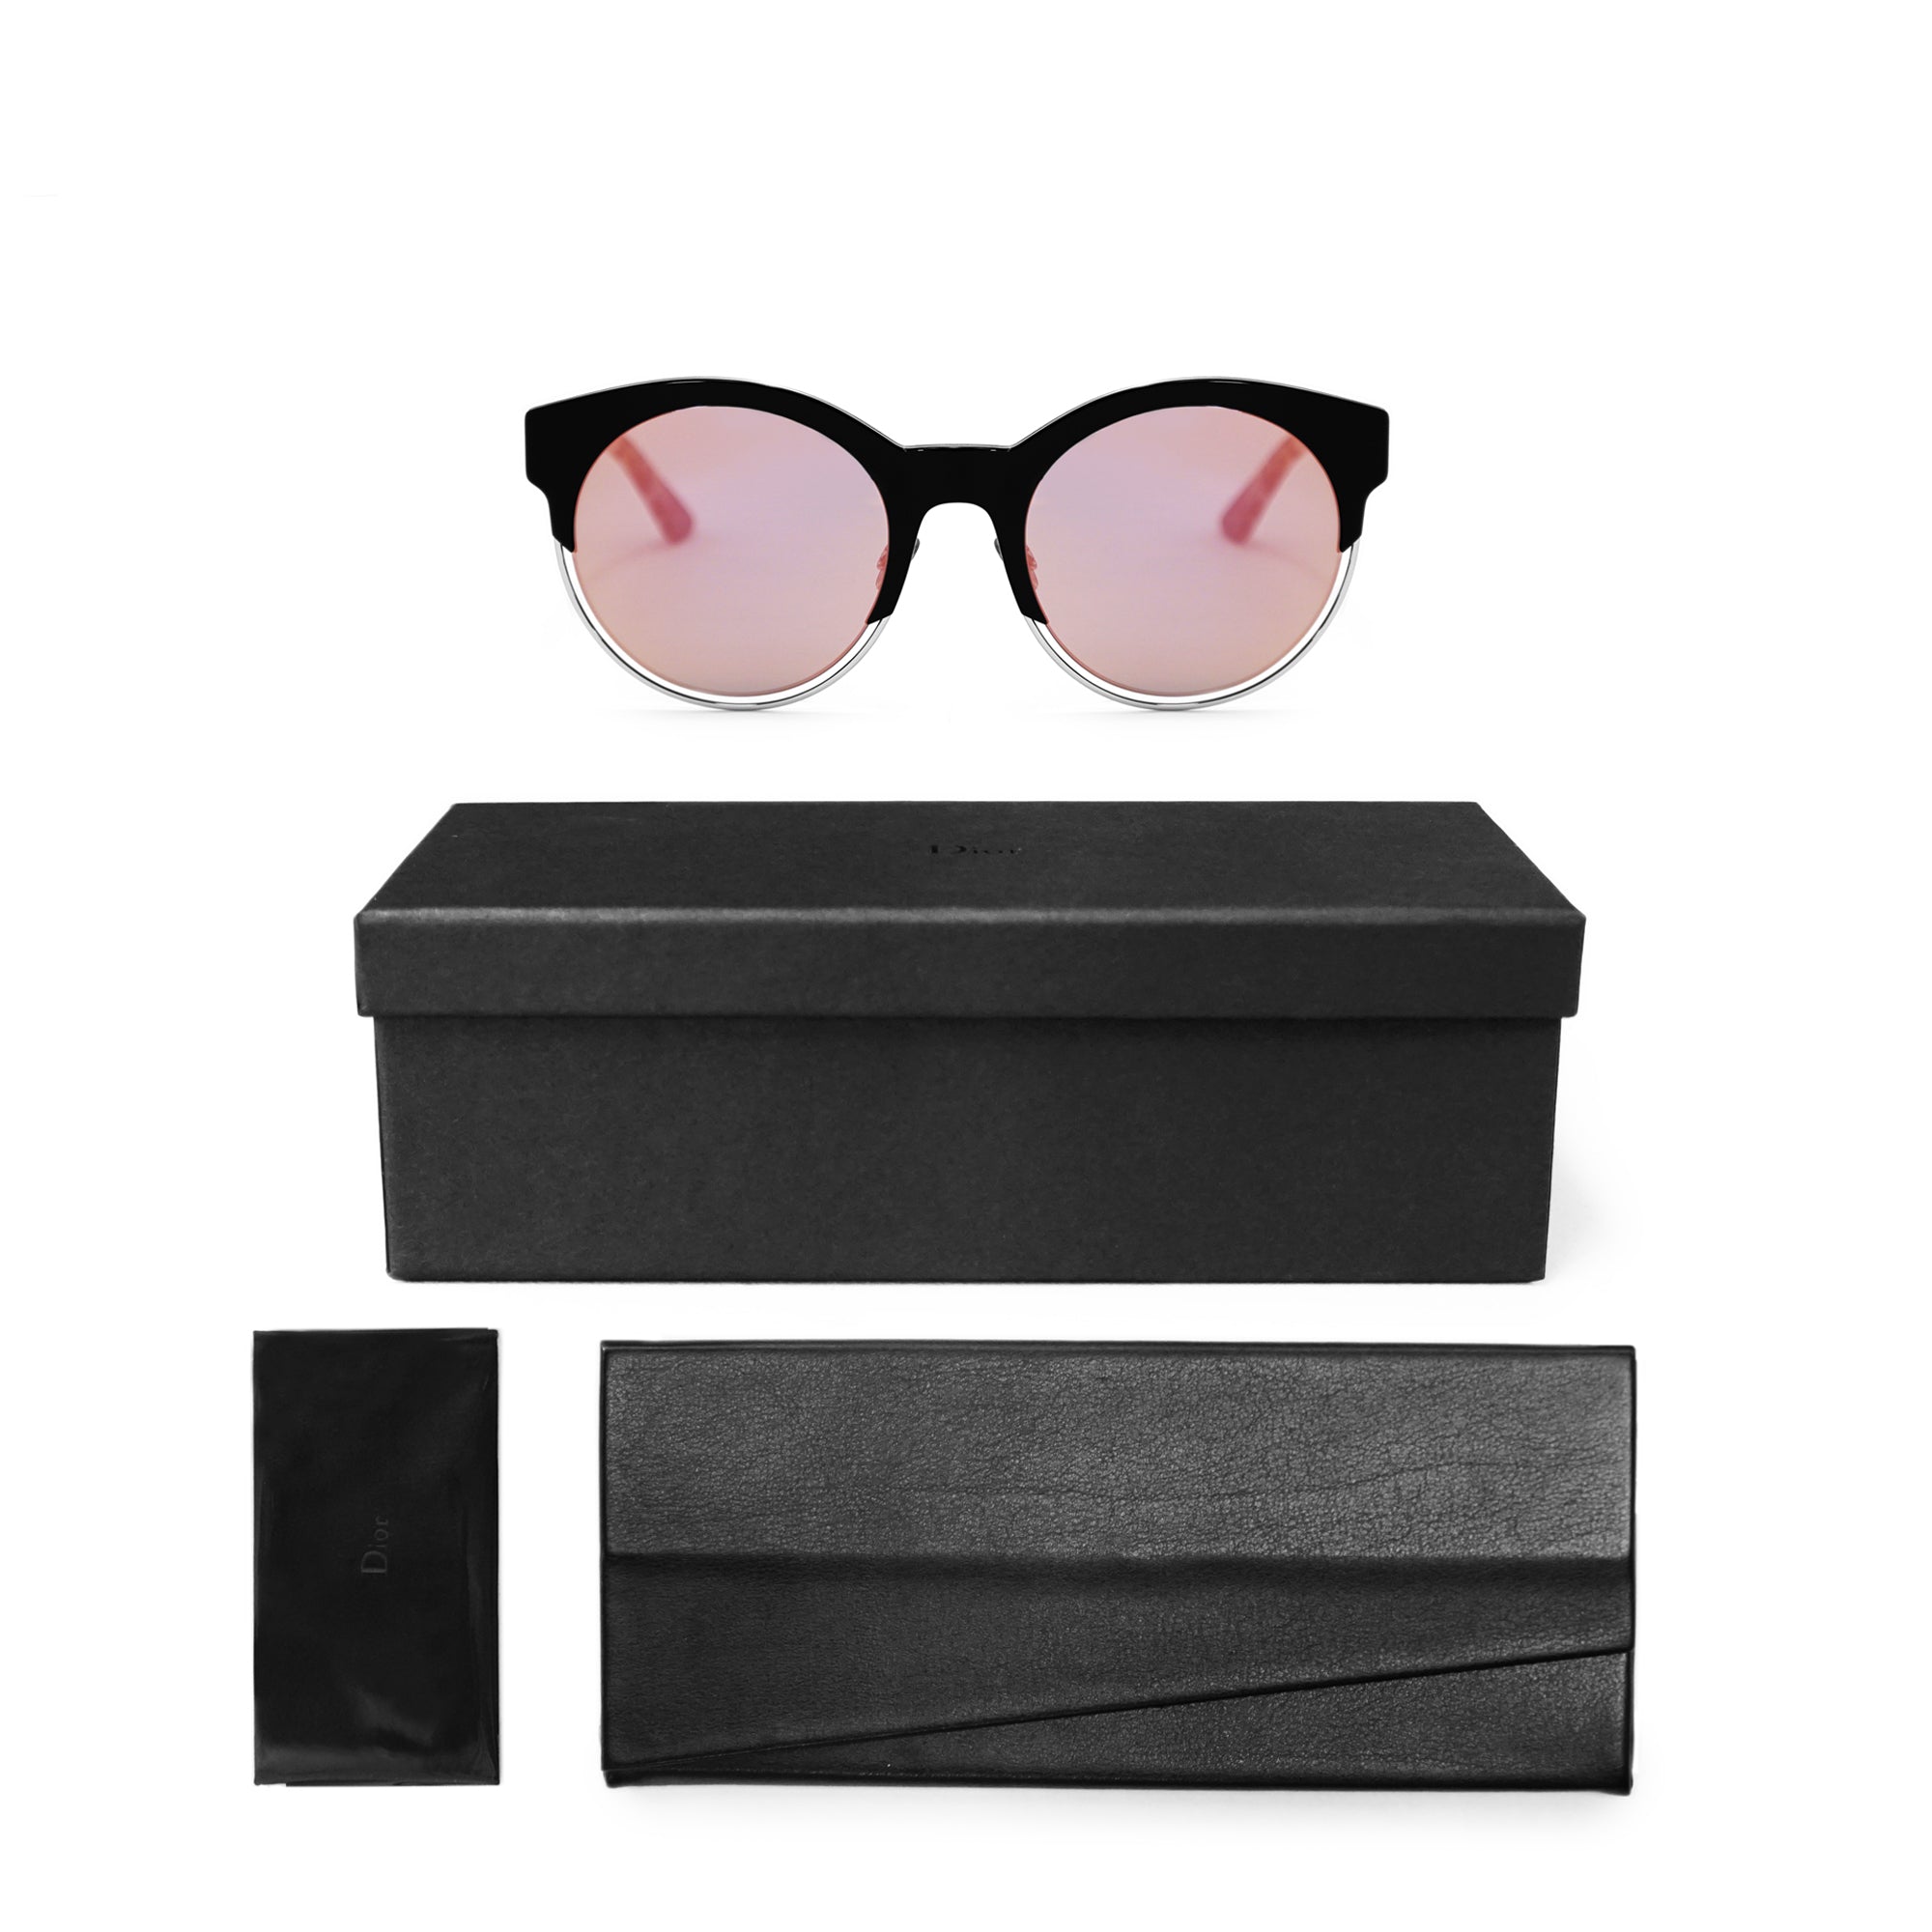 Dior Sideral 2 J9H Rose Gold Sunglasses  The Eye Place